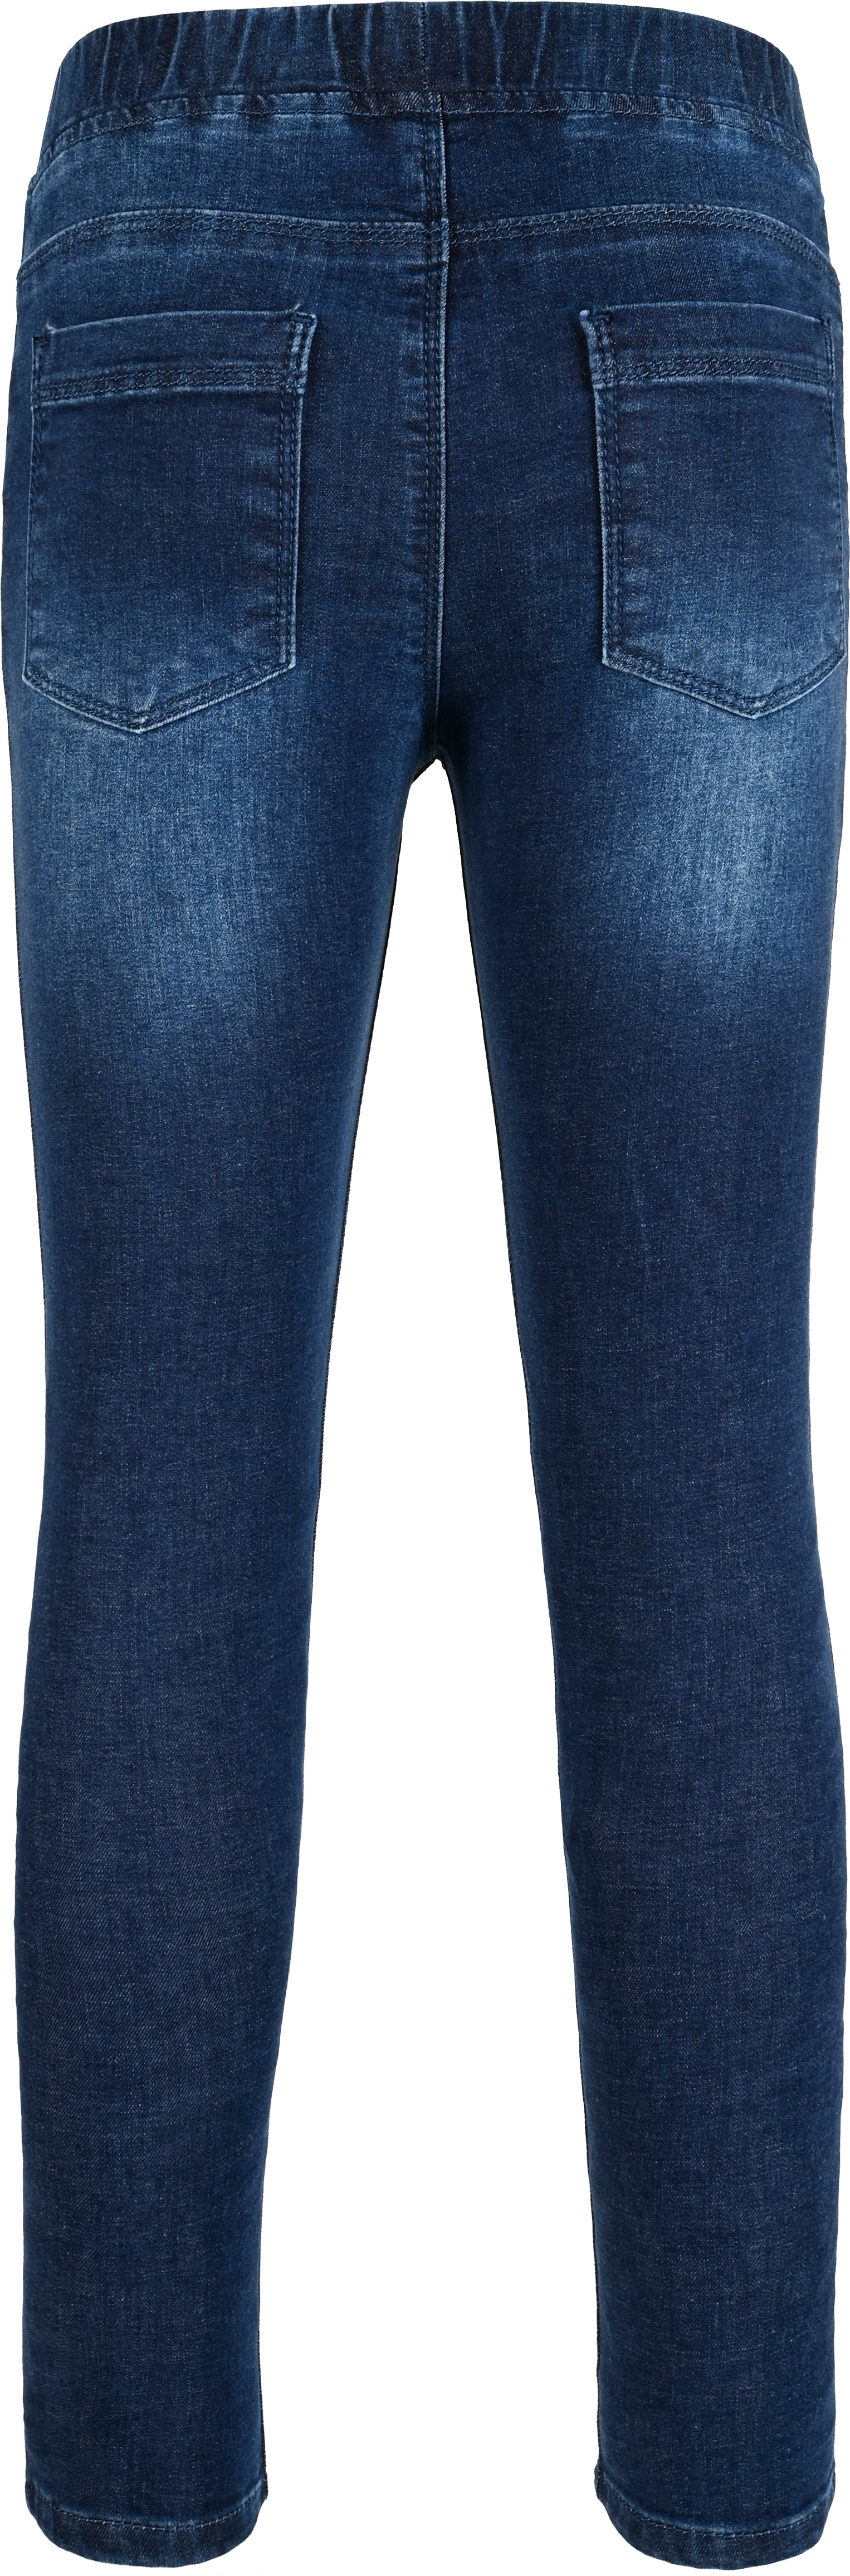 1308-NOS Girls SlipWaist Jeans Jegging, Ultrastretch, available in Normal